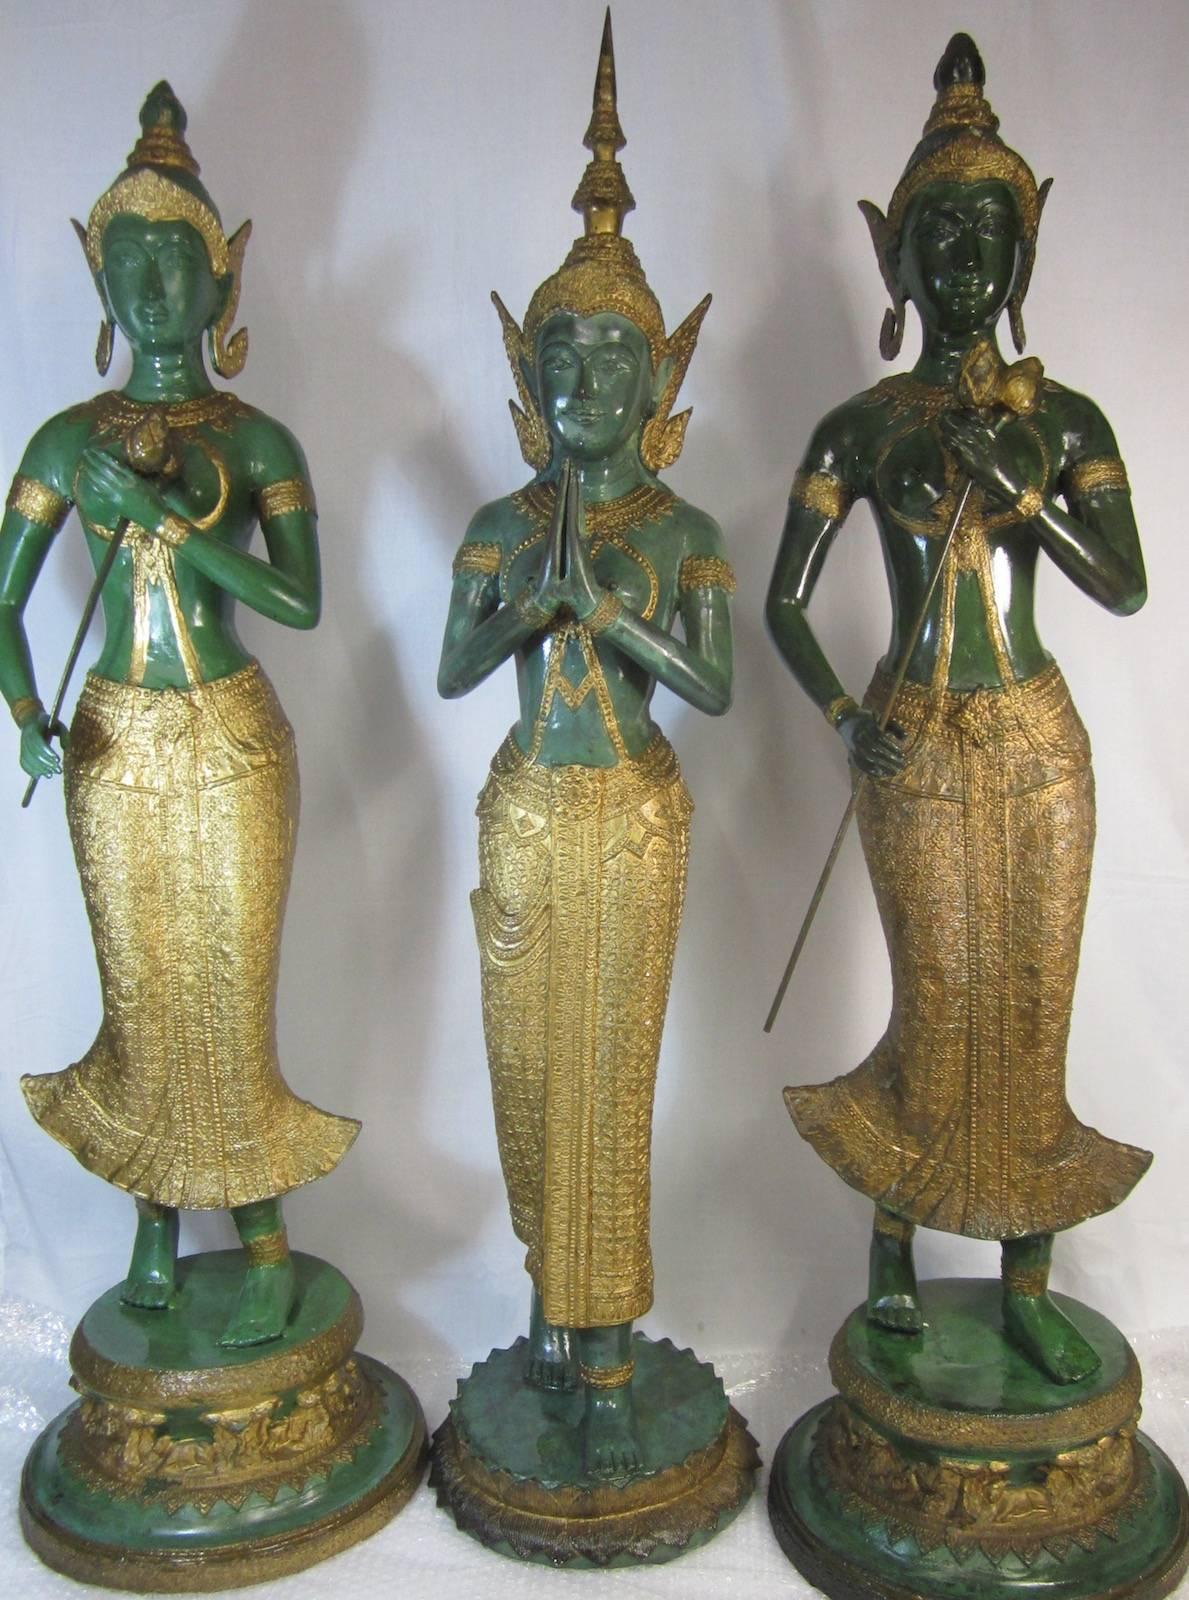 Three x Thai gilt decorated bronze statues,
total weight 57kg,
Measures: 28 x 115cm high.